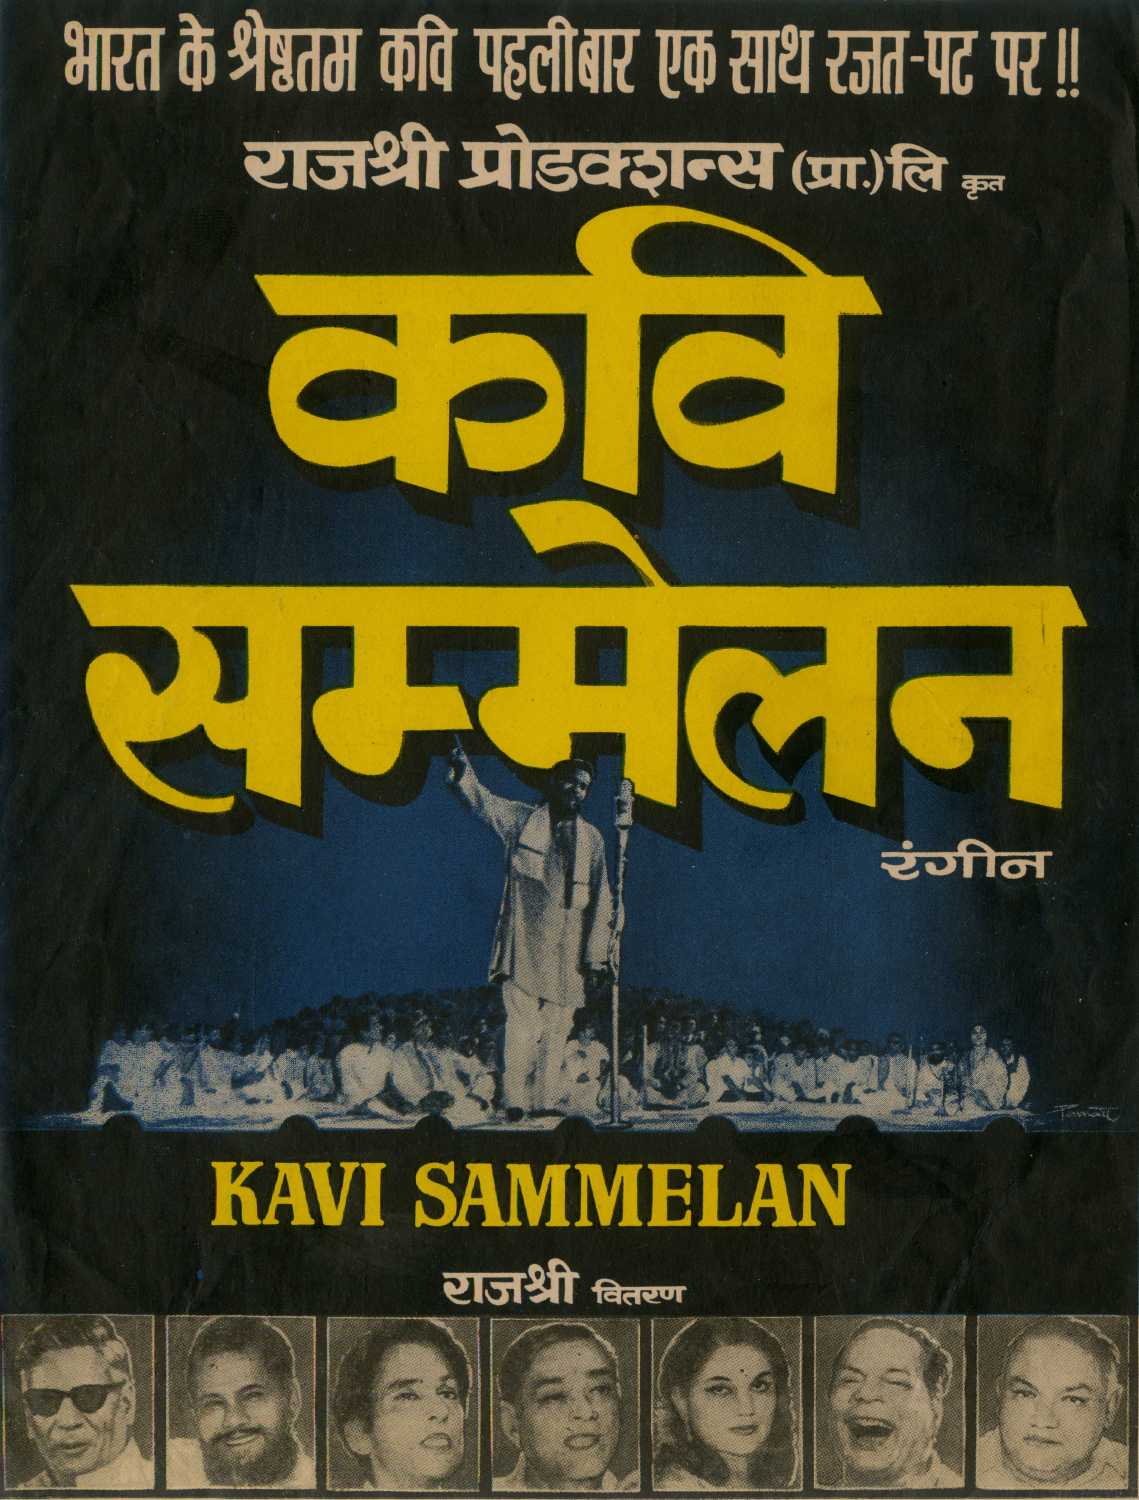 Kavi Sammelan Movie: Review | Release Date (1972) | Songs | Music | Images  | Official Trailers | Videos | Photos | News - Bollywood Hungama